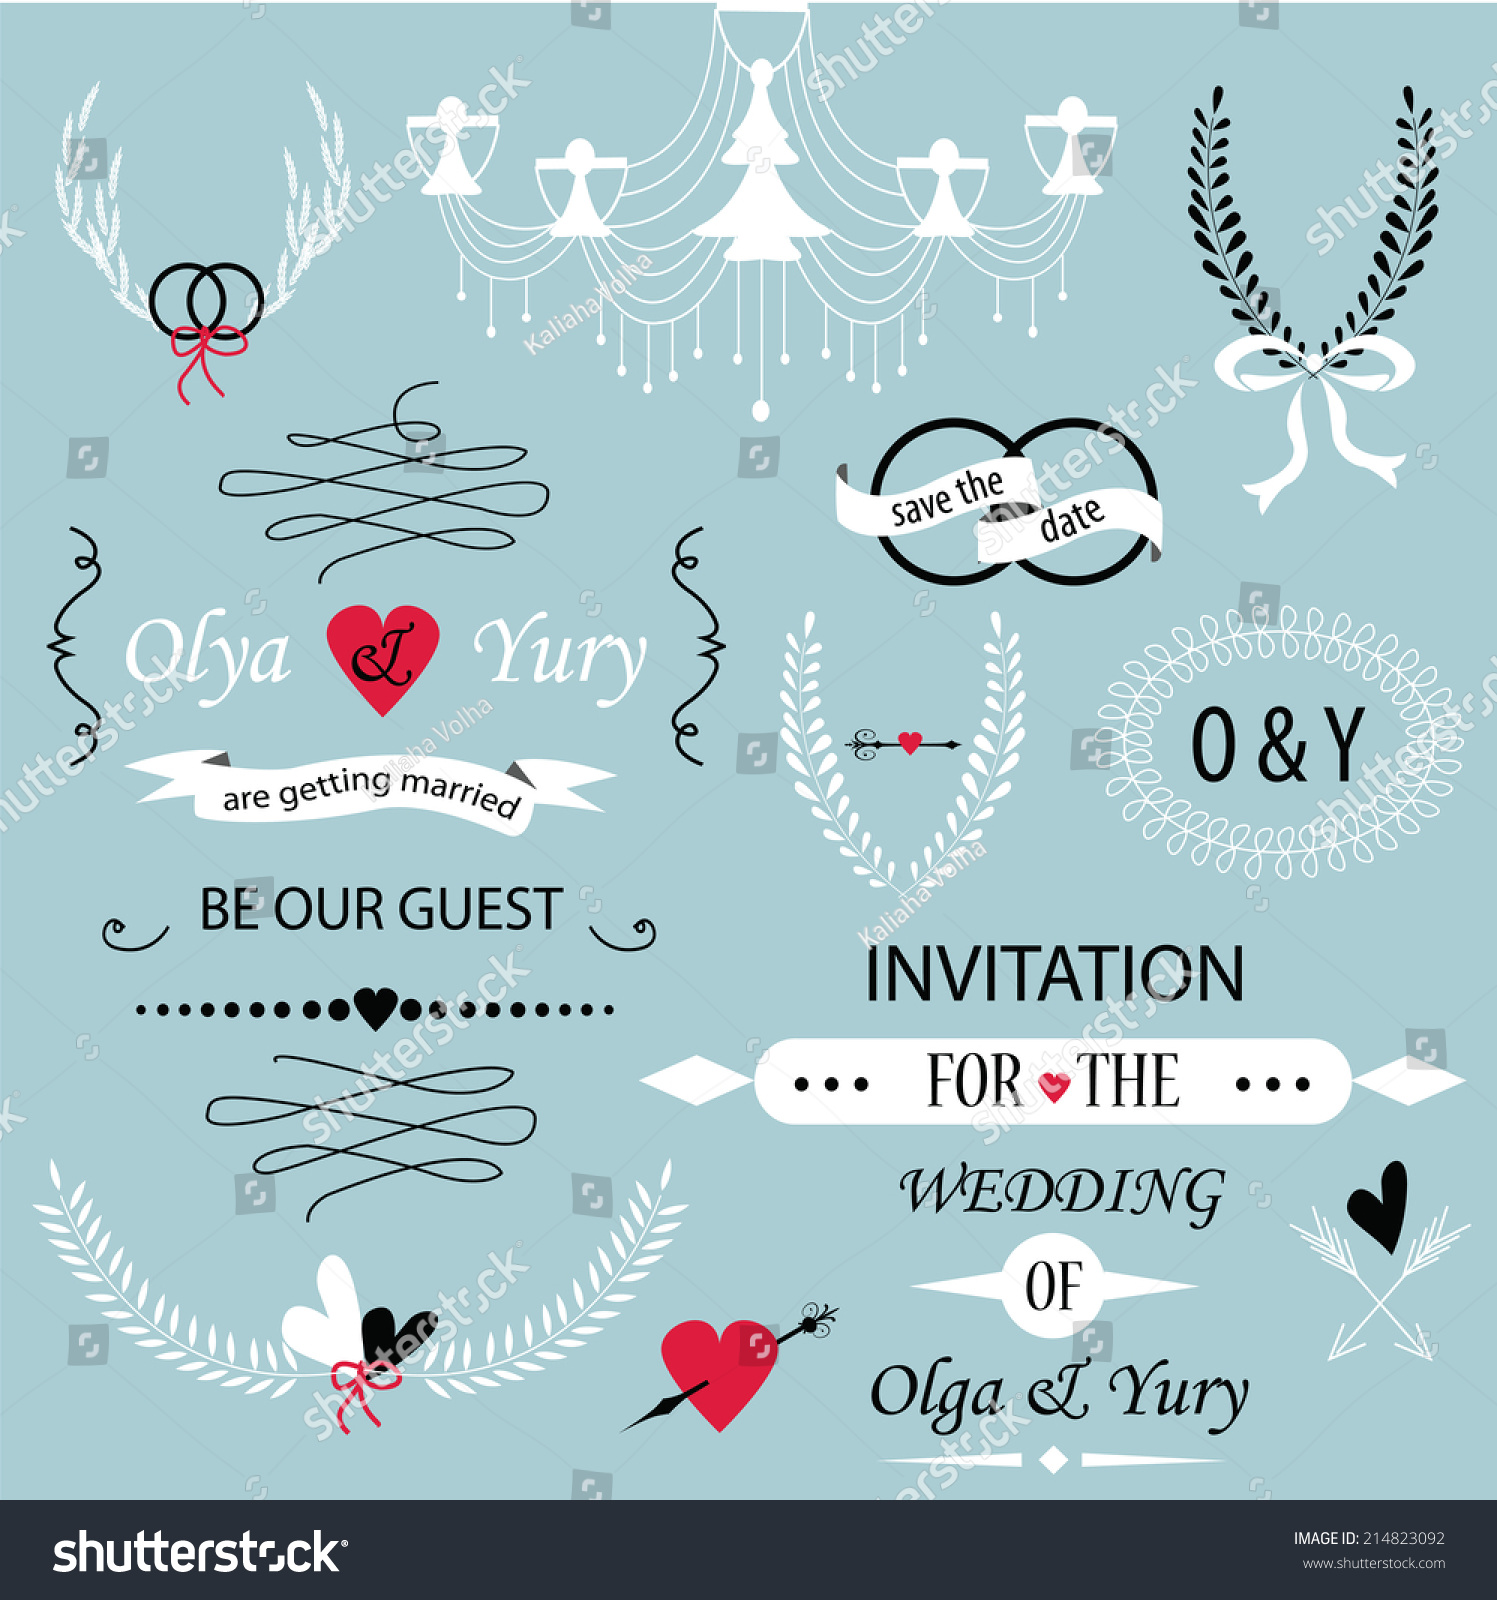 SVG of Wedding set with laurels, calligraphic elements, rings, bows, ribbons, arrows and chandelier svg